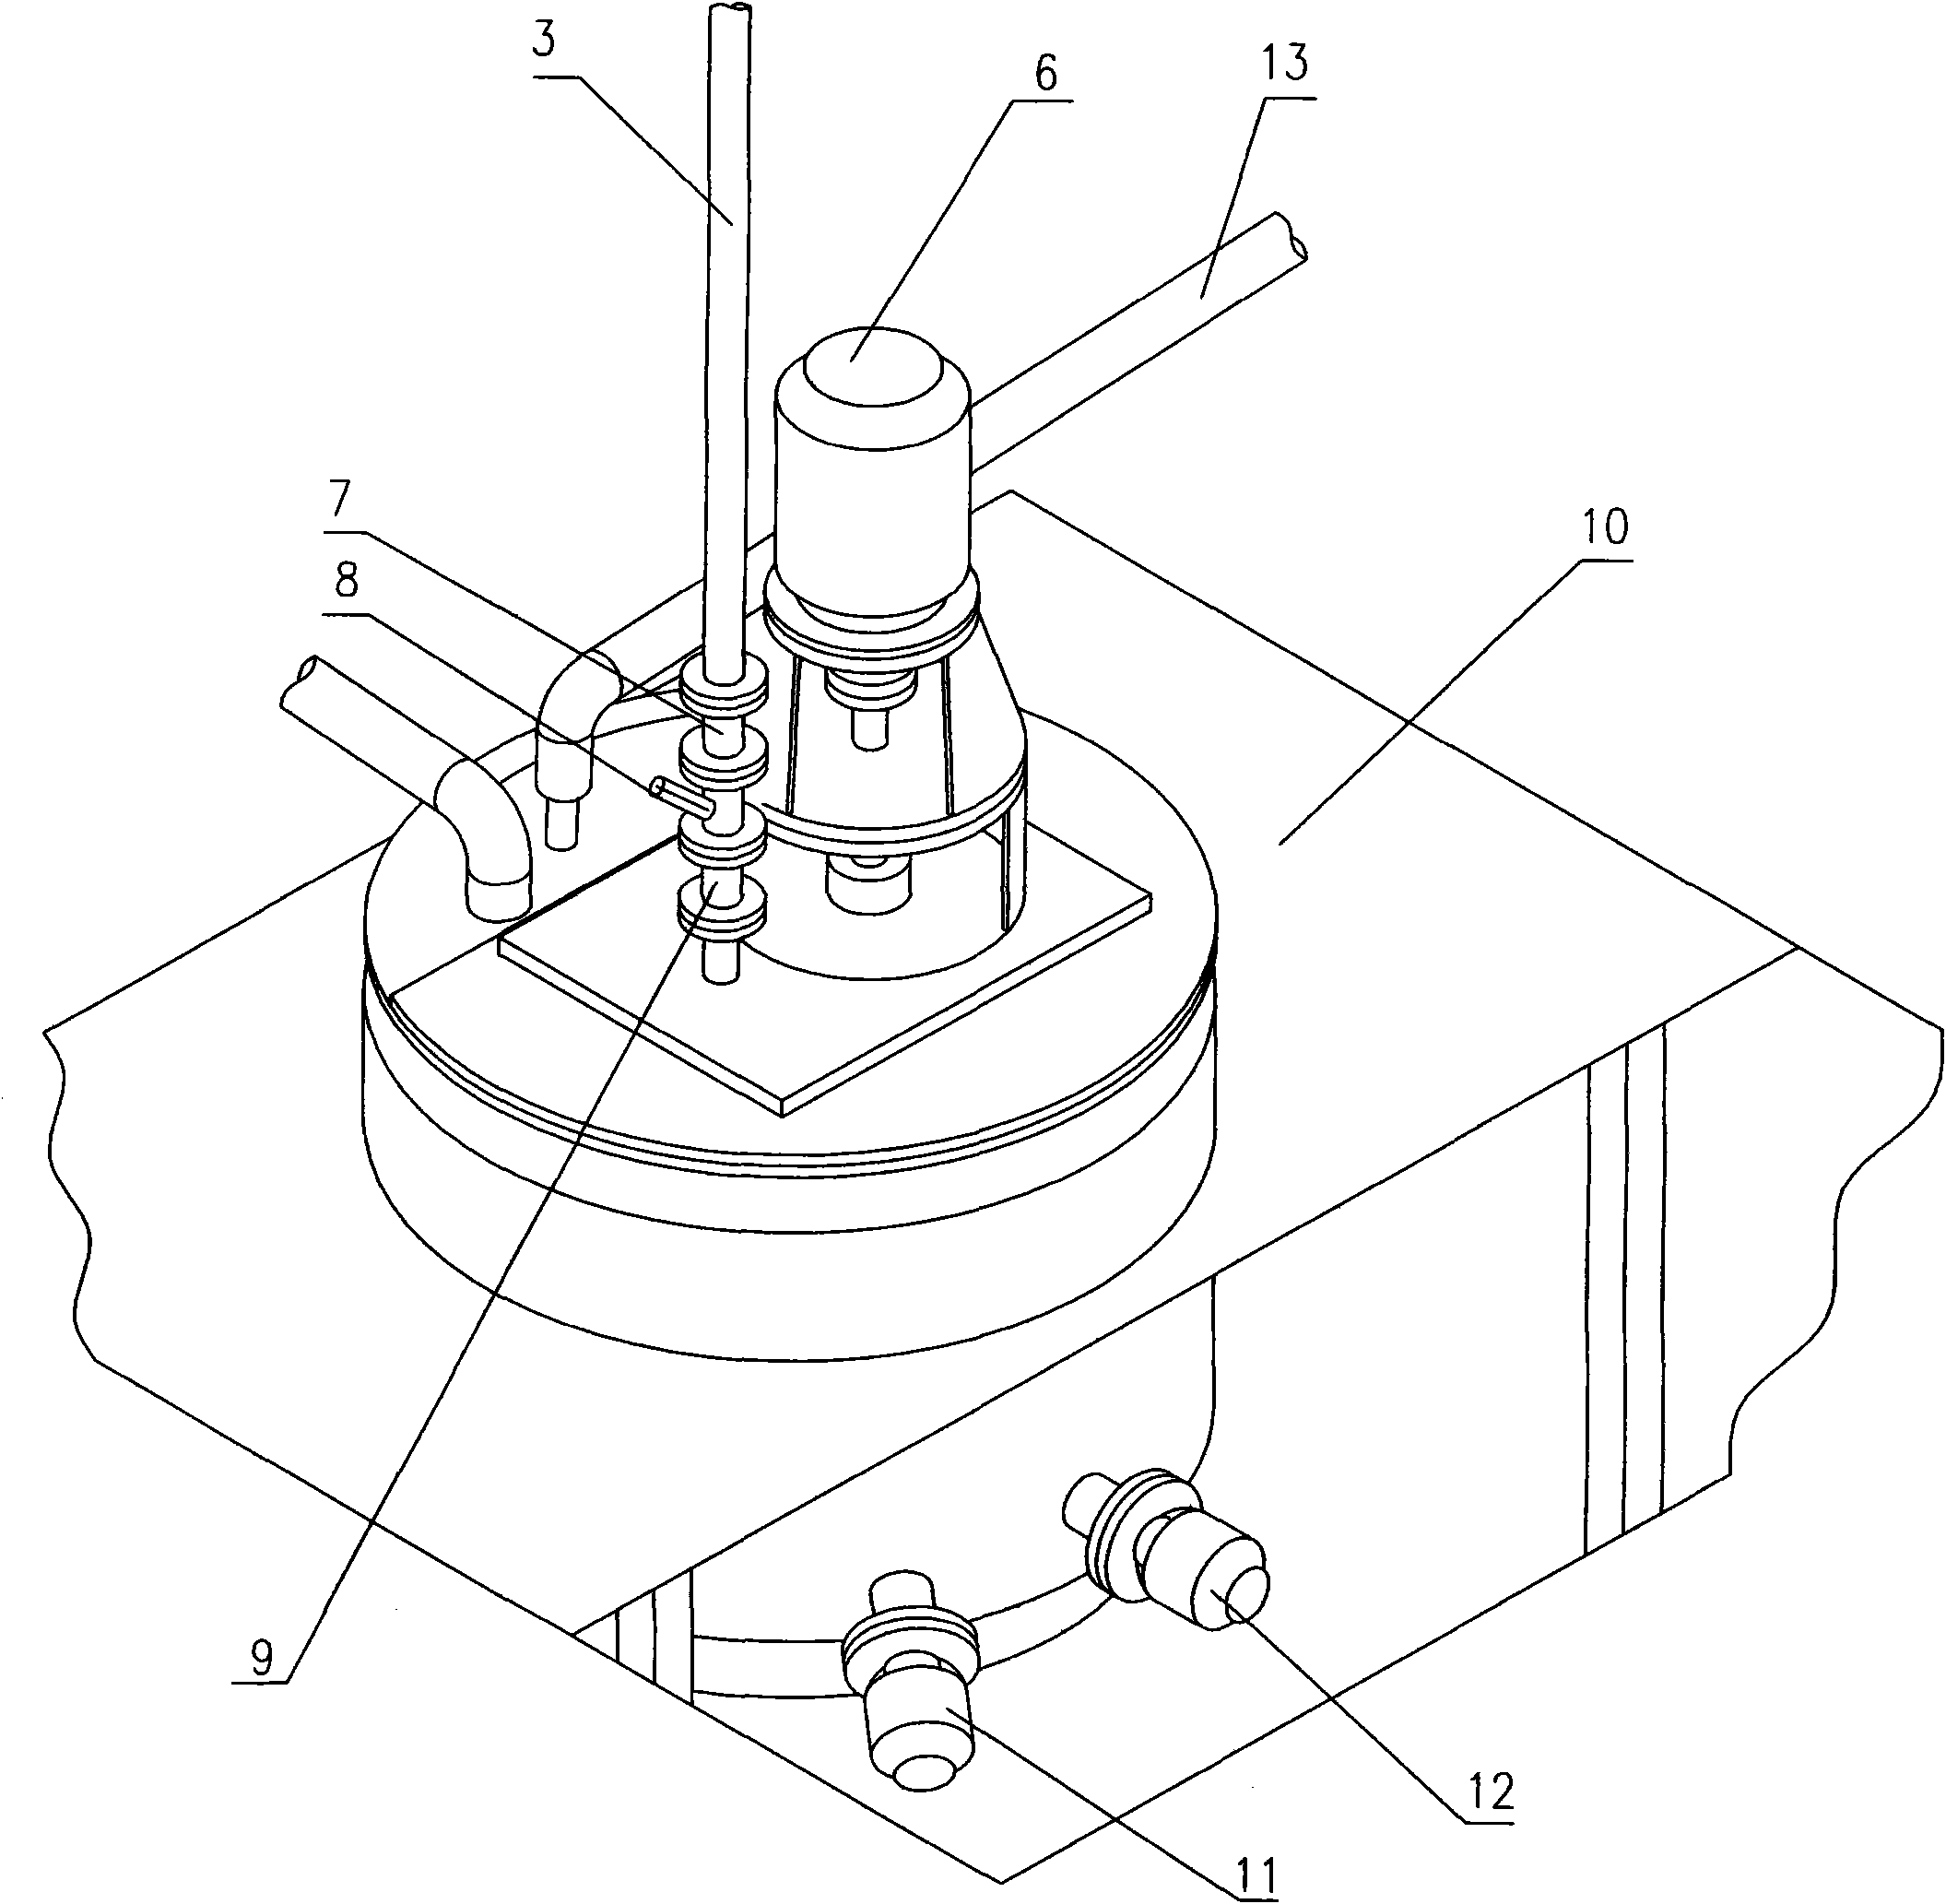 Pumping device and system for jet stirring of ammonium nitrate solution